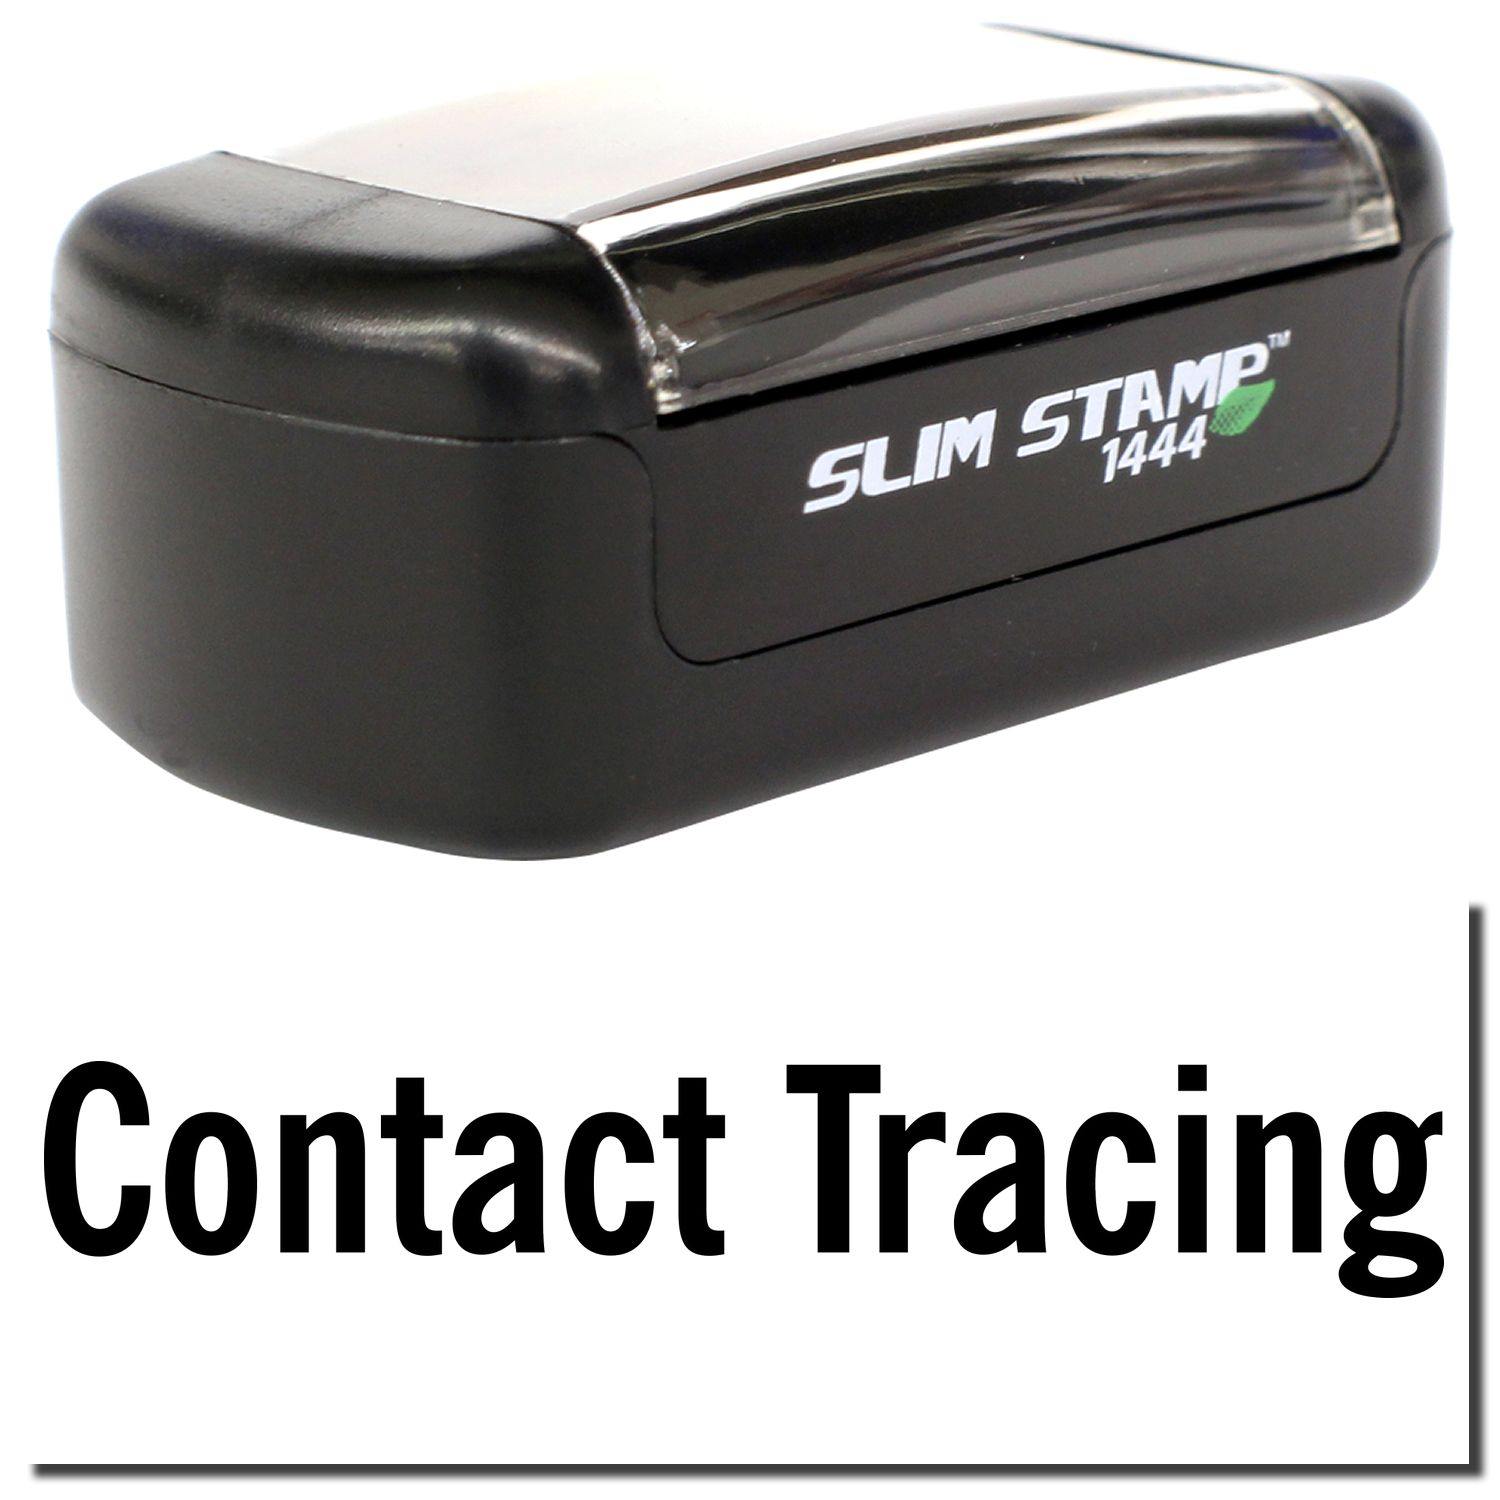 A stock office pre-inked stamp with a stamped image showing how the text "Contact Tracing" is displayed after stamping.